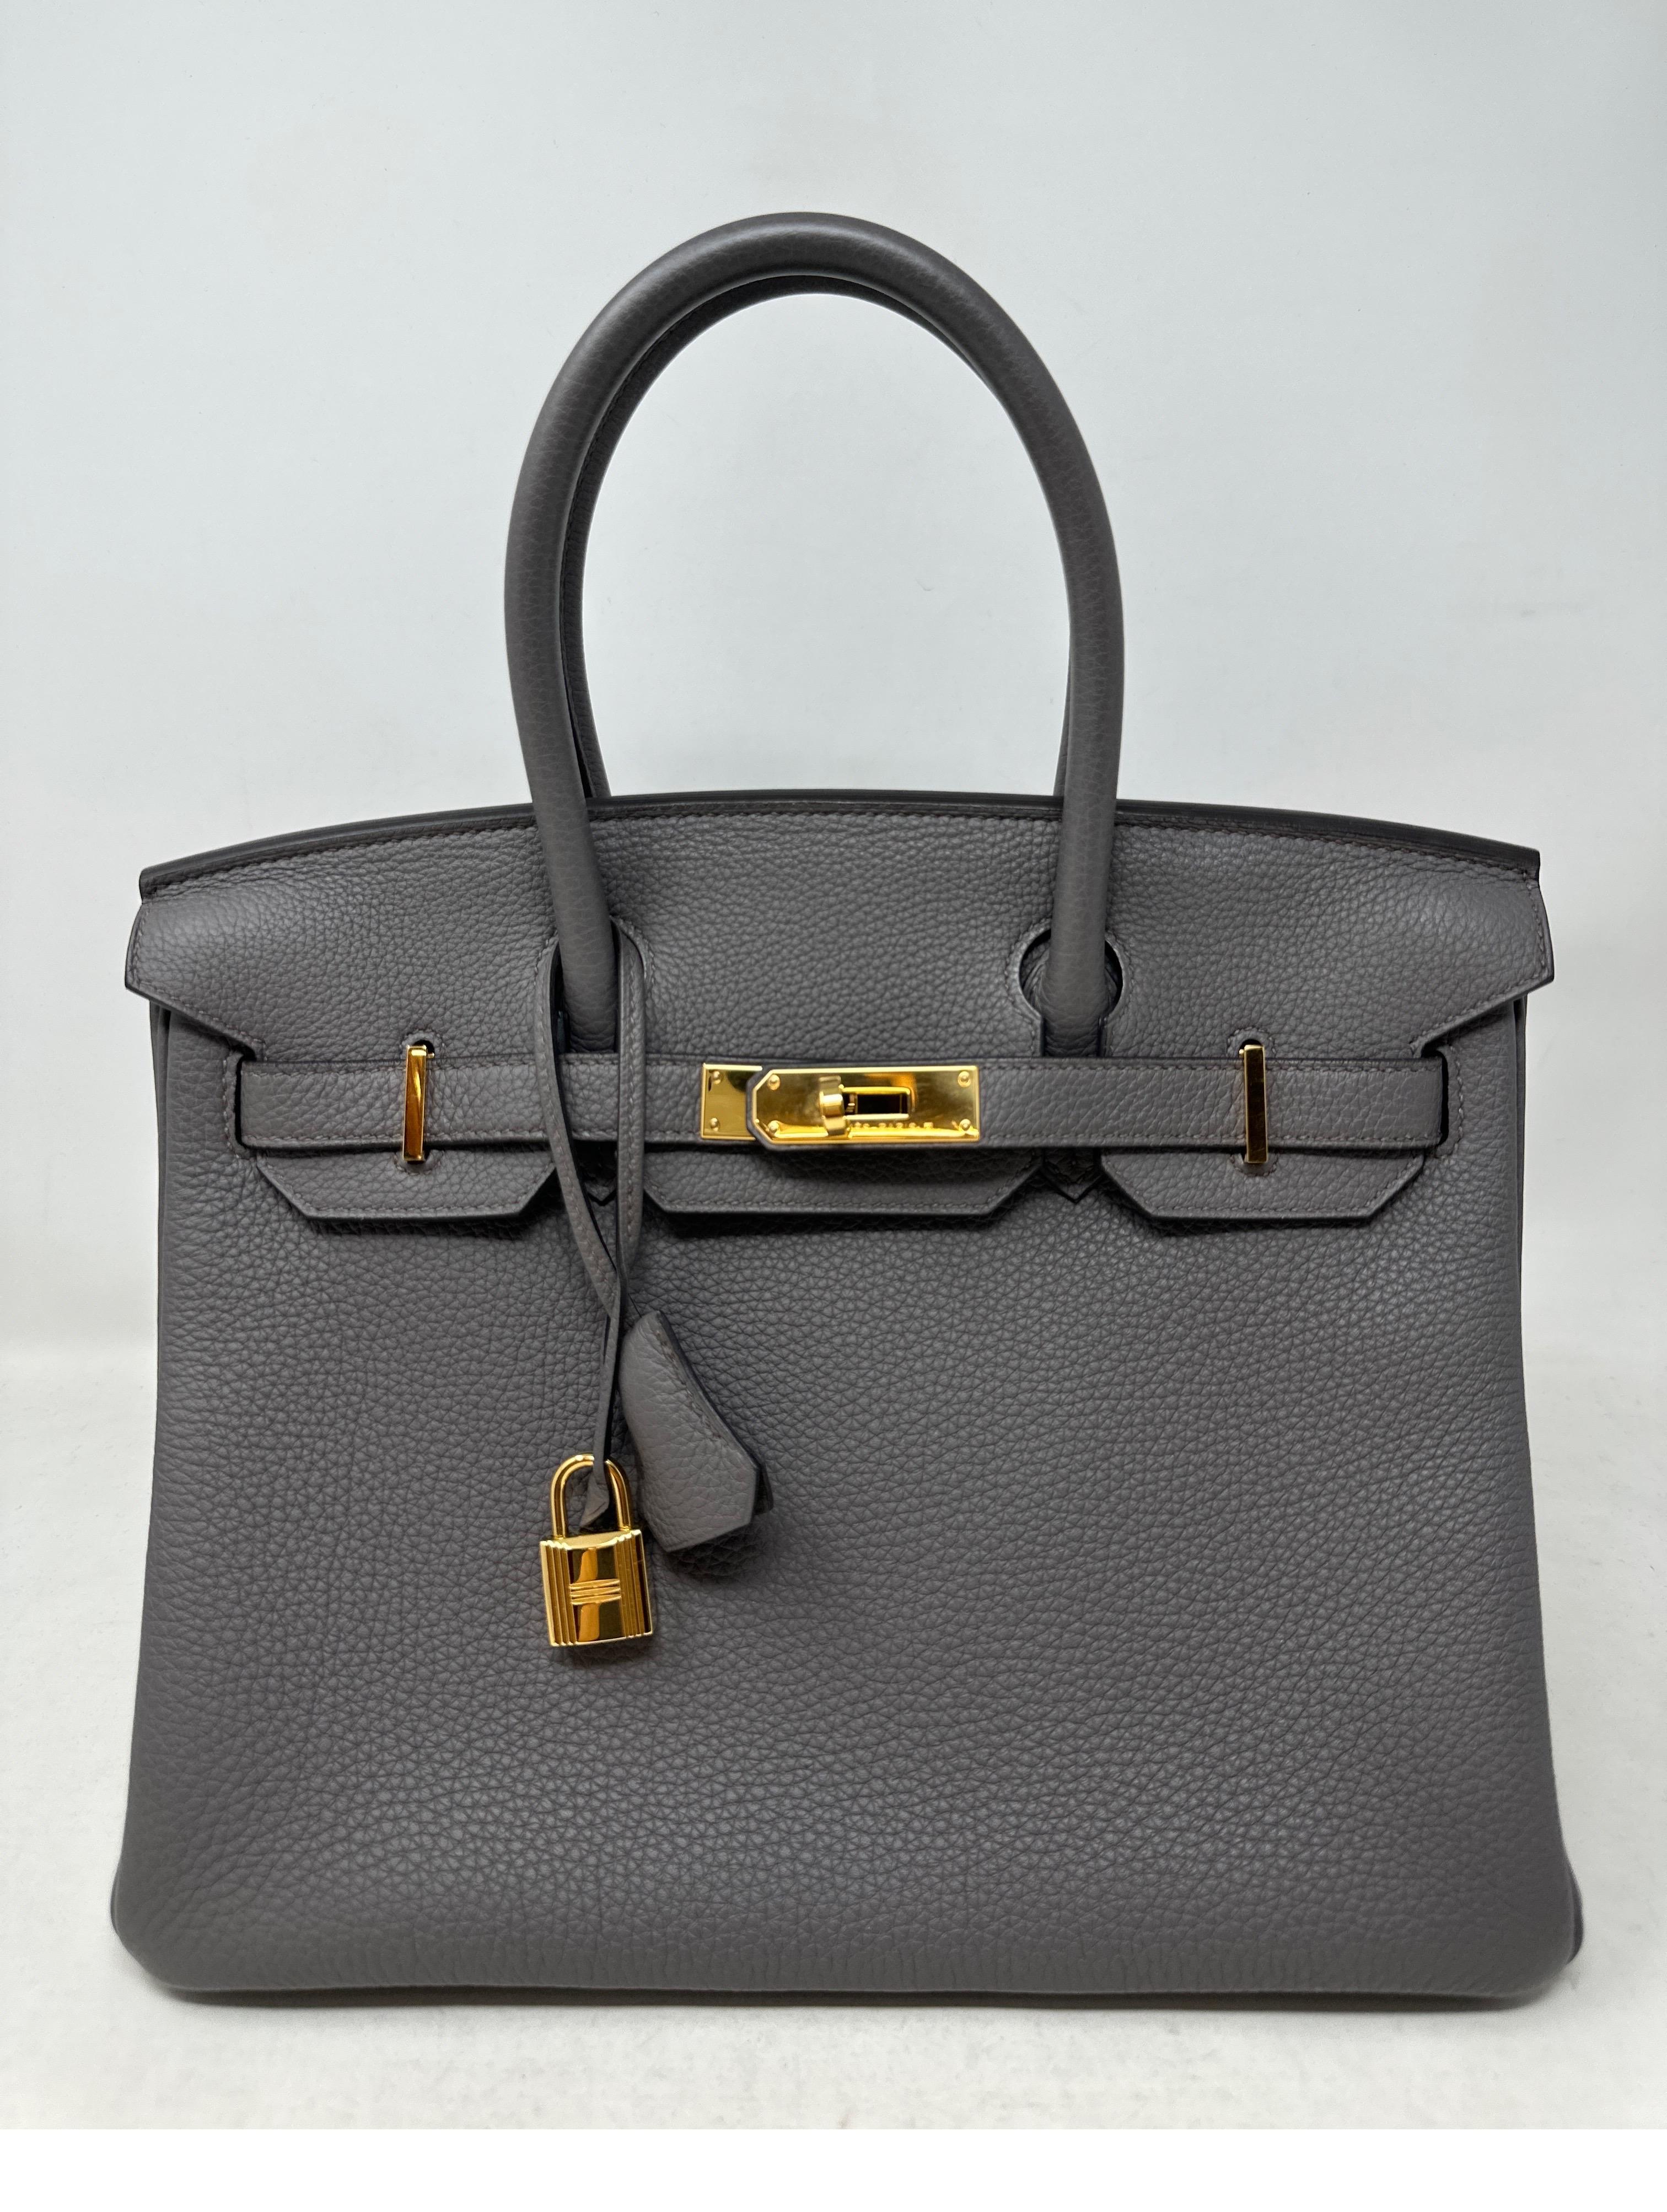 Hermes Etain Birkin 30 Bag. Newer Hermes Birkin. Gold hardware. Plastic still on hardware. The most wanted size and color of the season. Great investment bag. Includes clochette, lock, keys, and dust bag. Guaranteed authentic. 